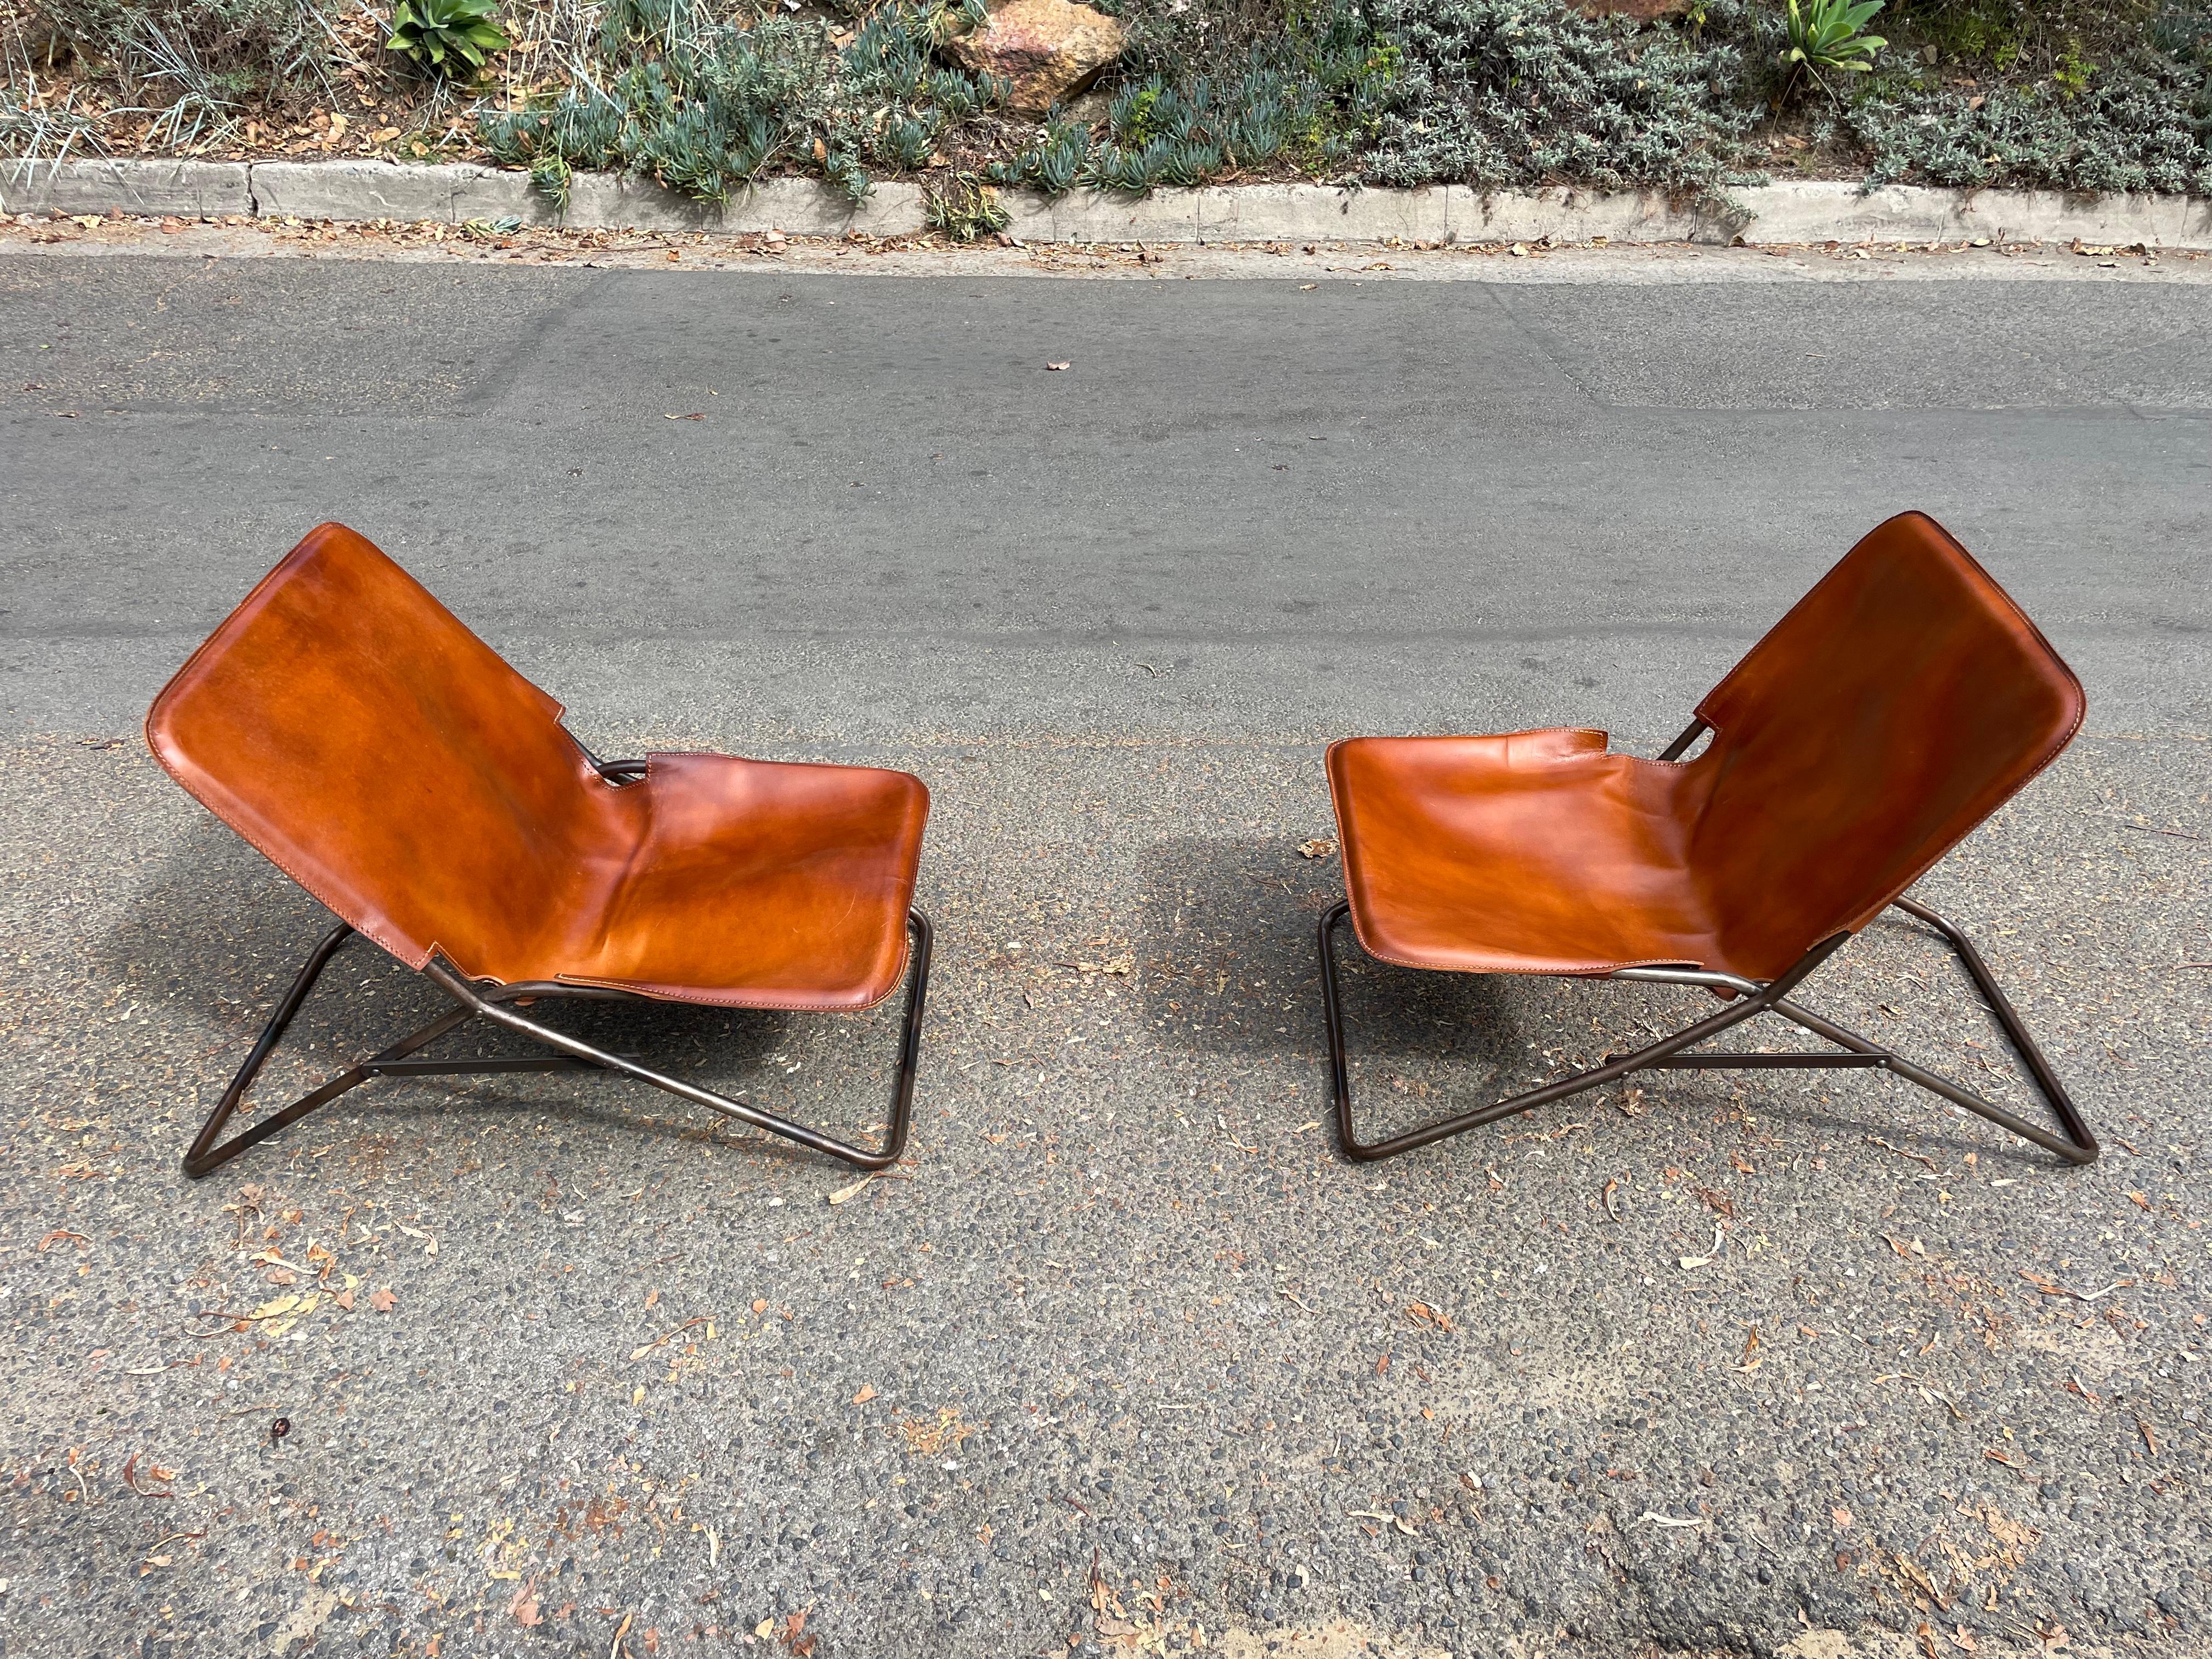 American Vintage Lawson-Fenning Leather Sling Chairs